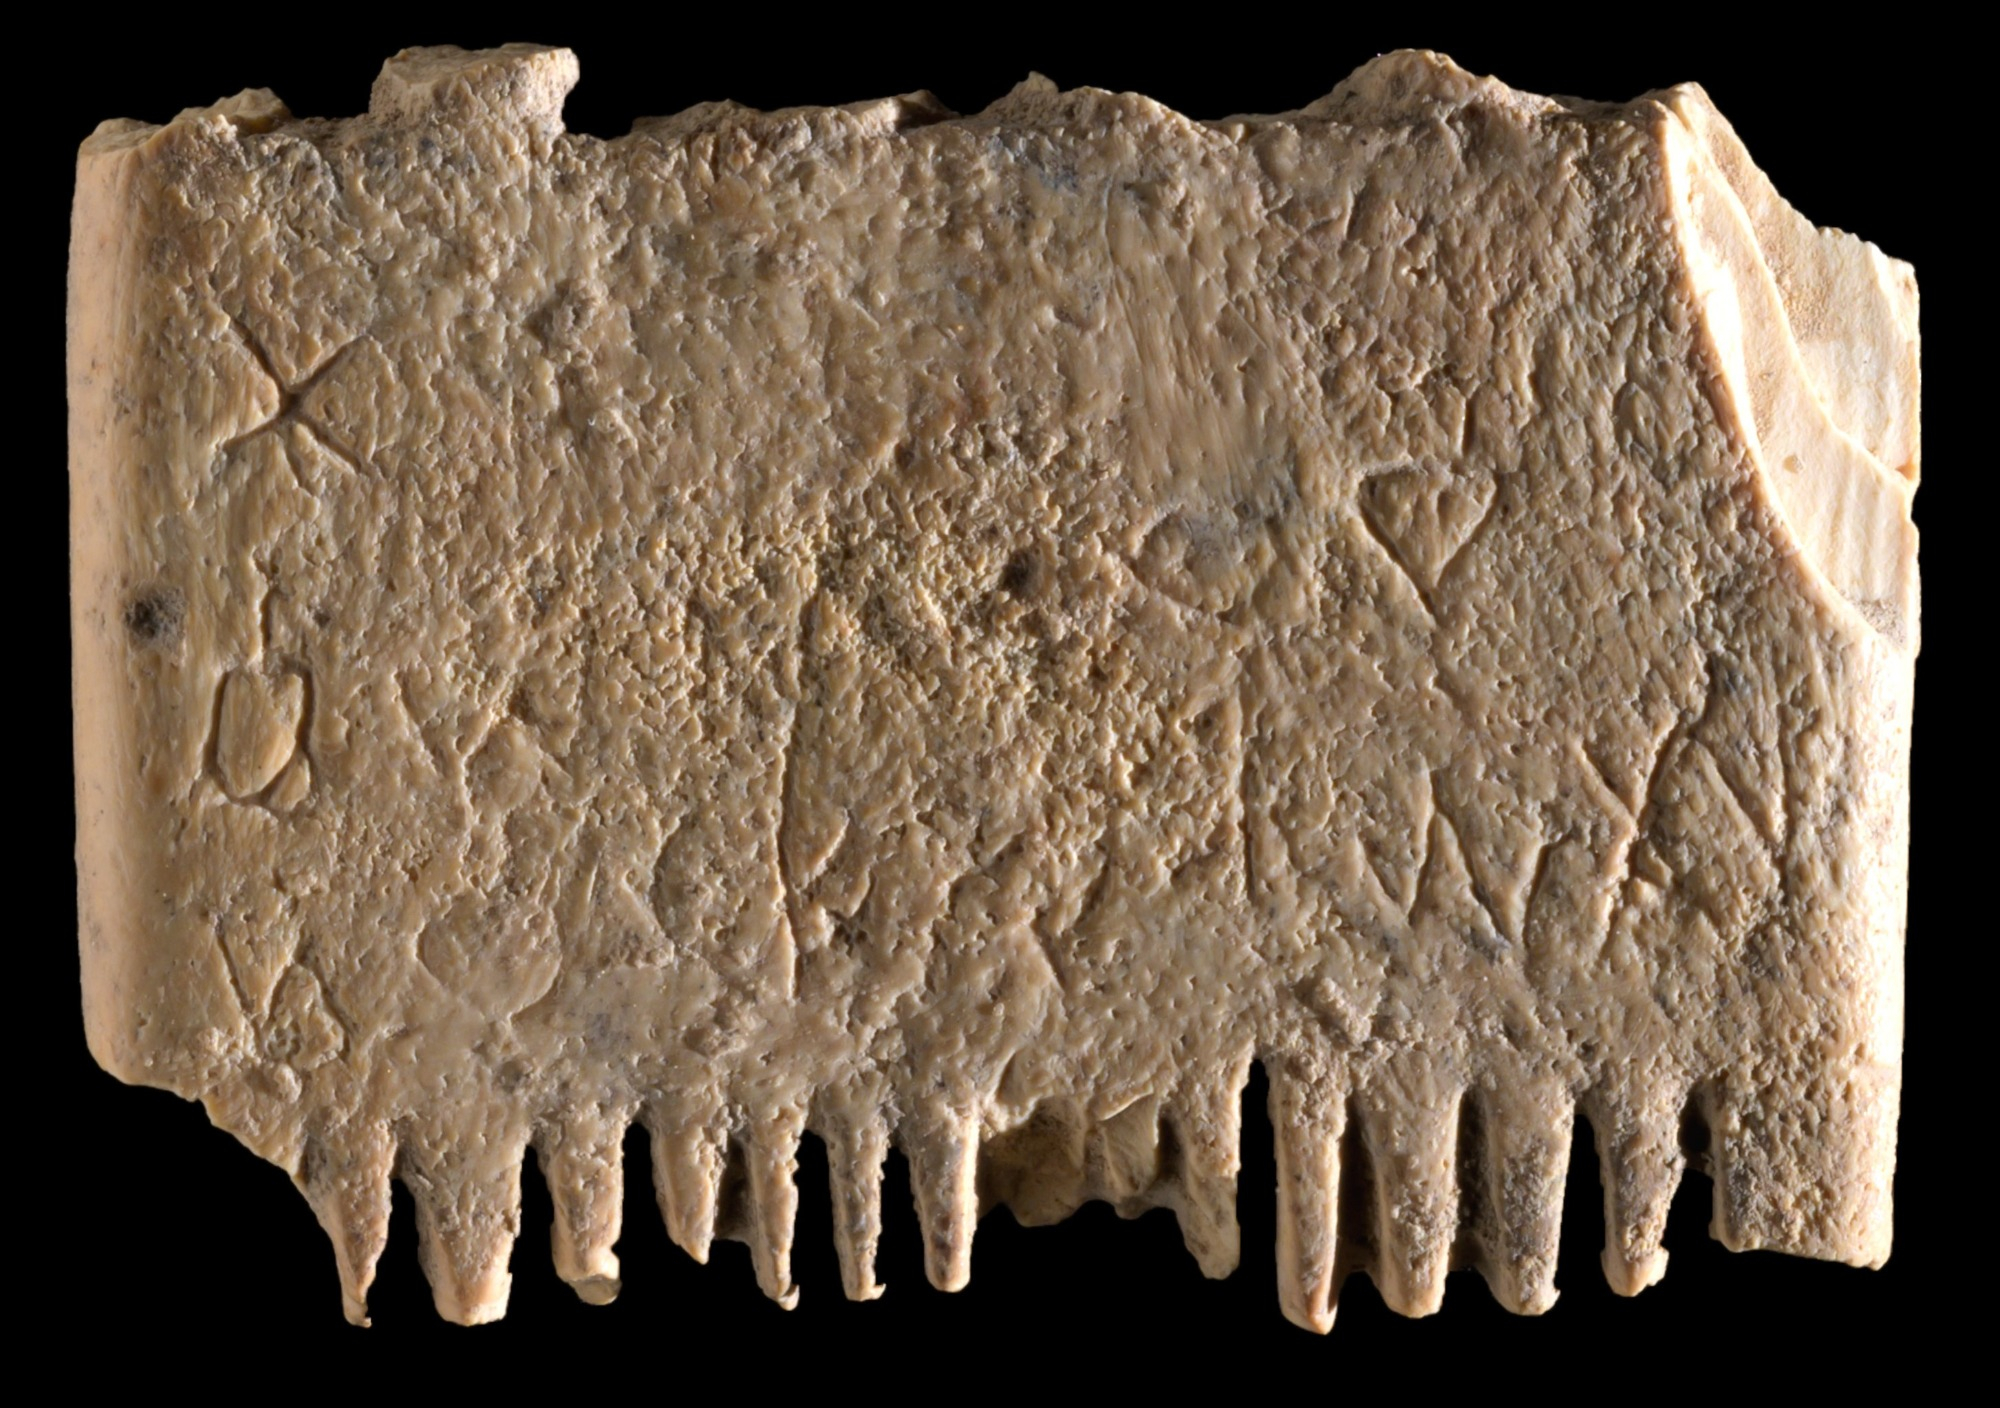 An ivory comb dating back to about 1700 BCE containing a written spell against lice.